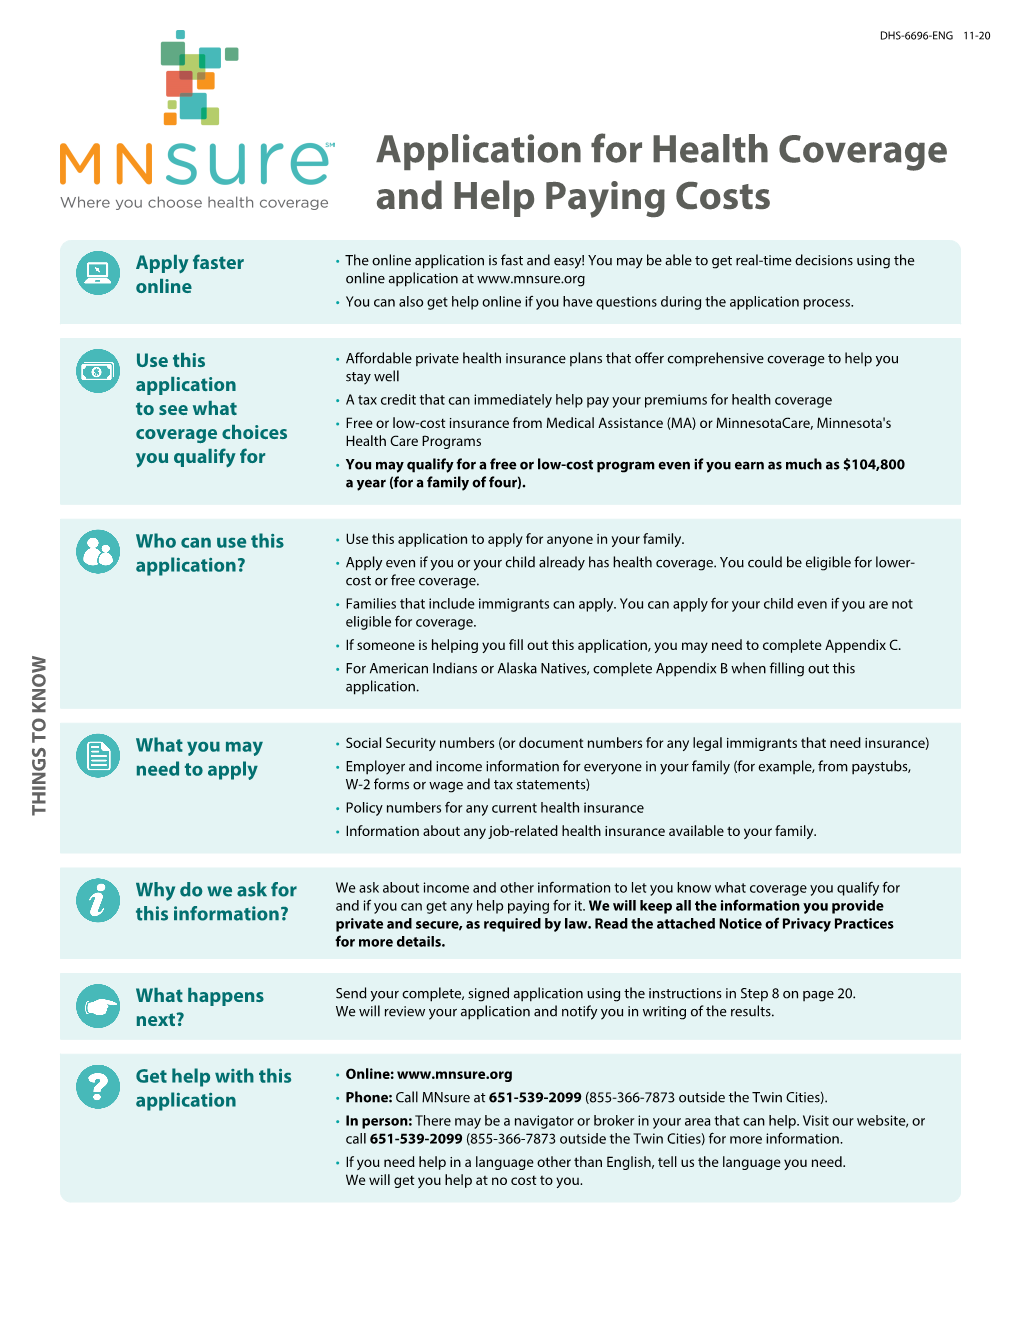 DHS-6696-ENG (Mnsure Application for Health Coverage and Help Paying Costs)